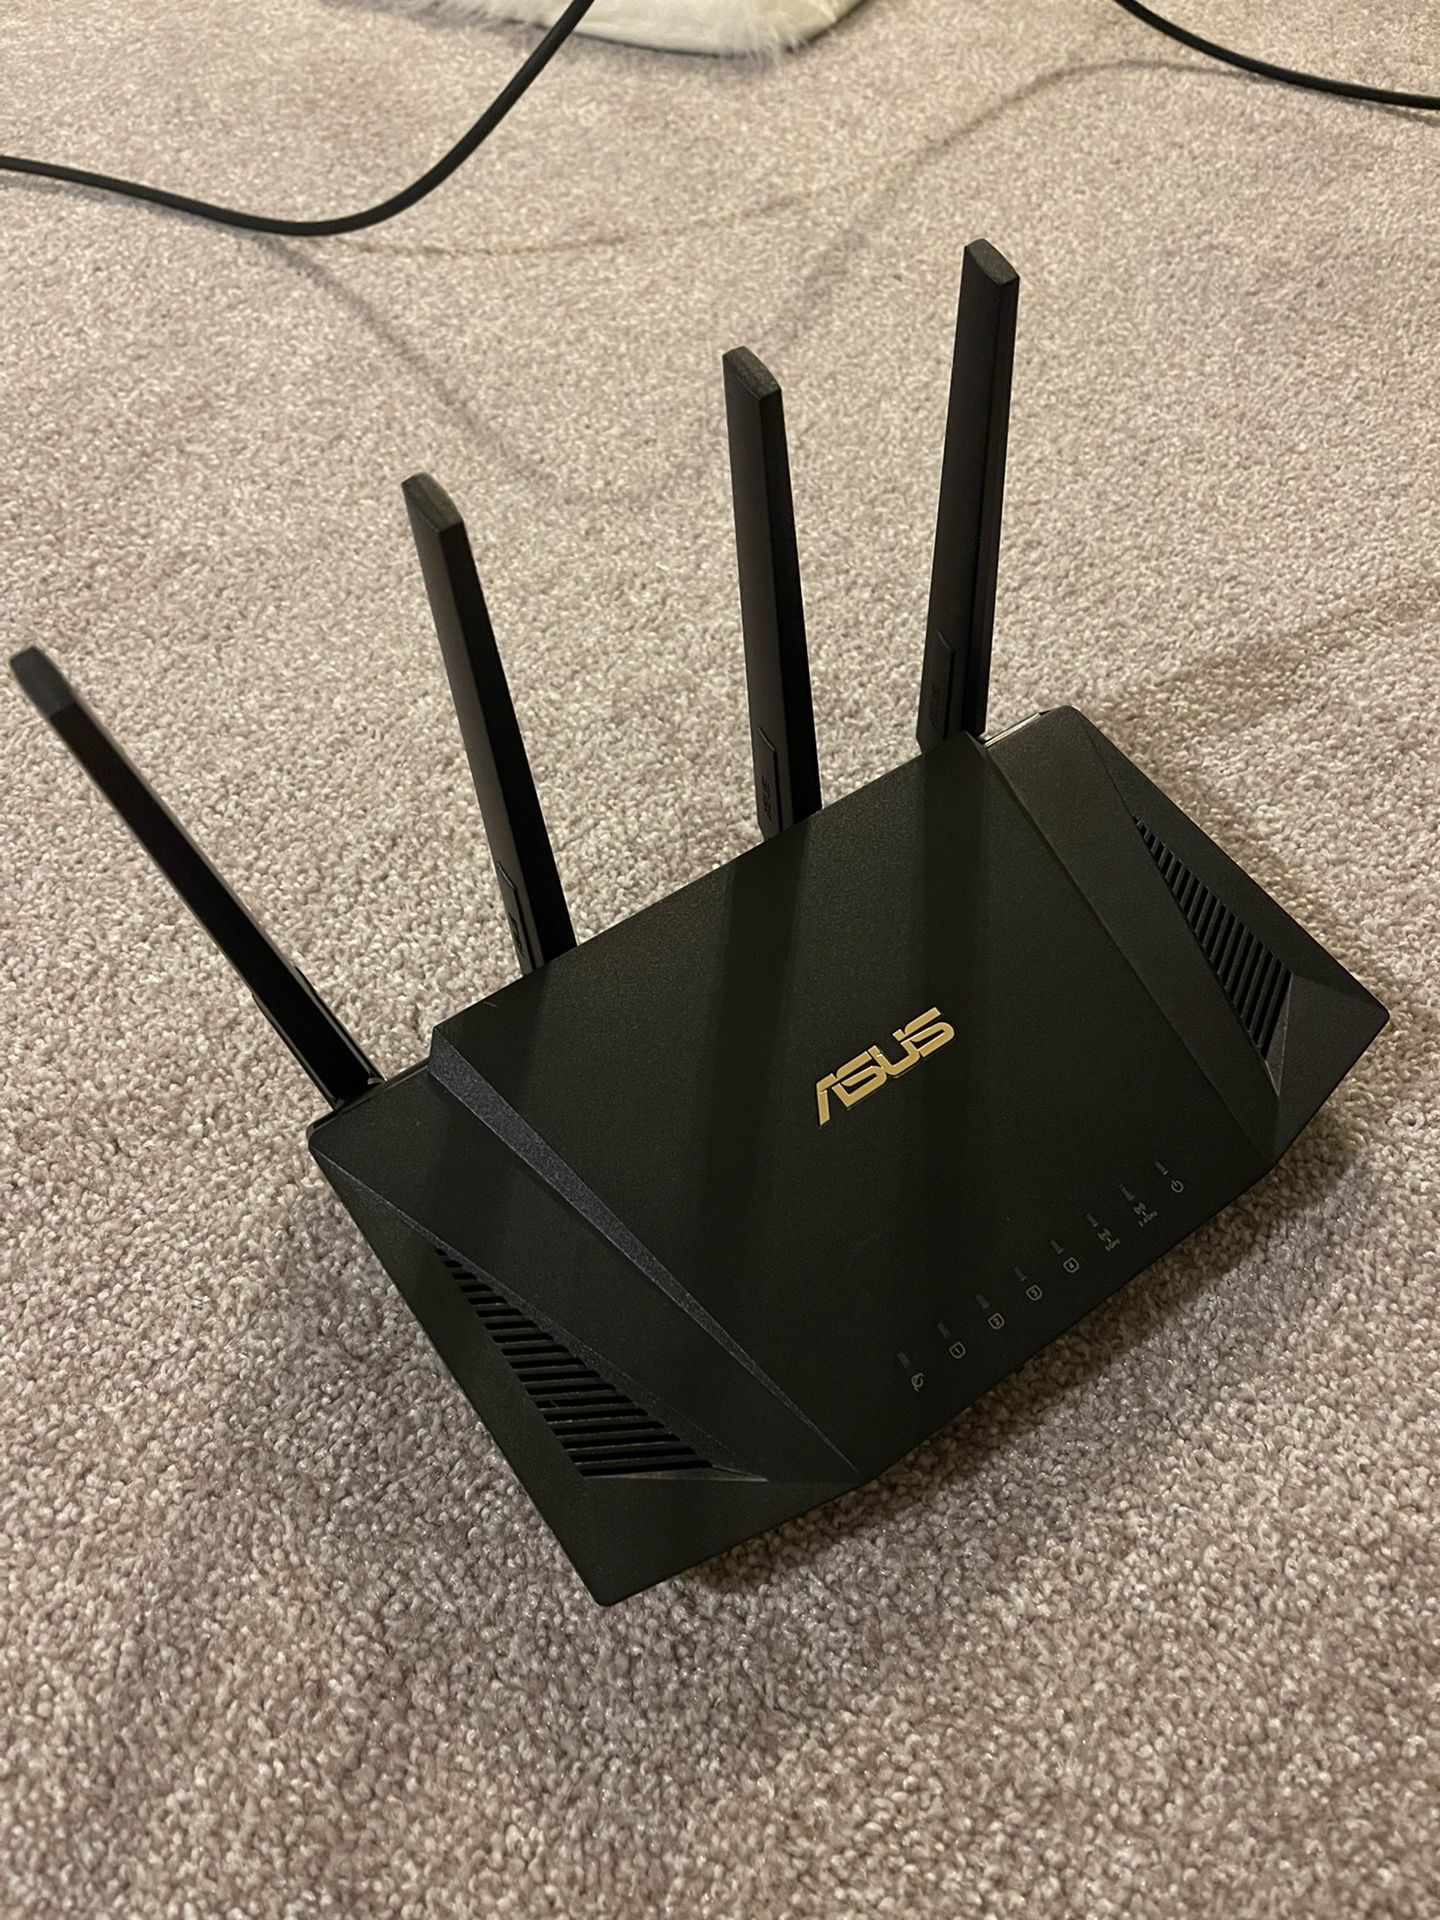 Asus RT-AX58U Wifi 6 Router 4x4